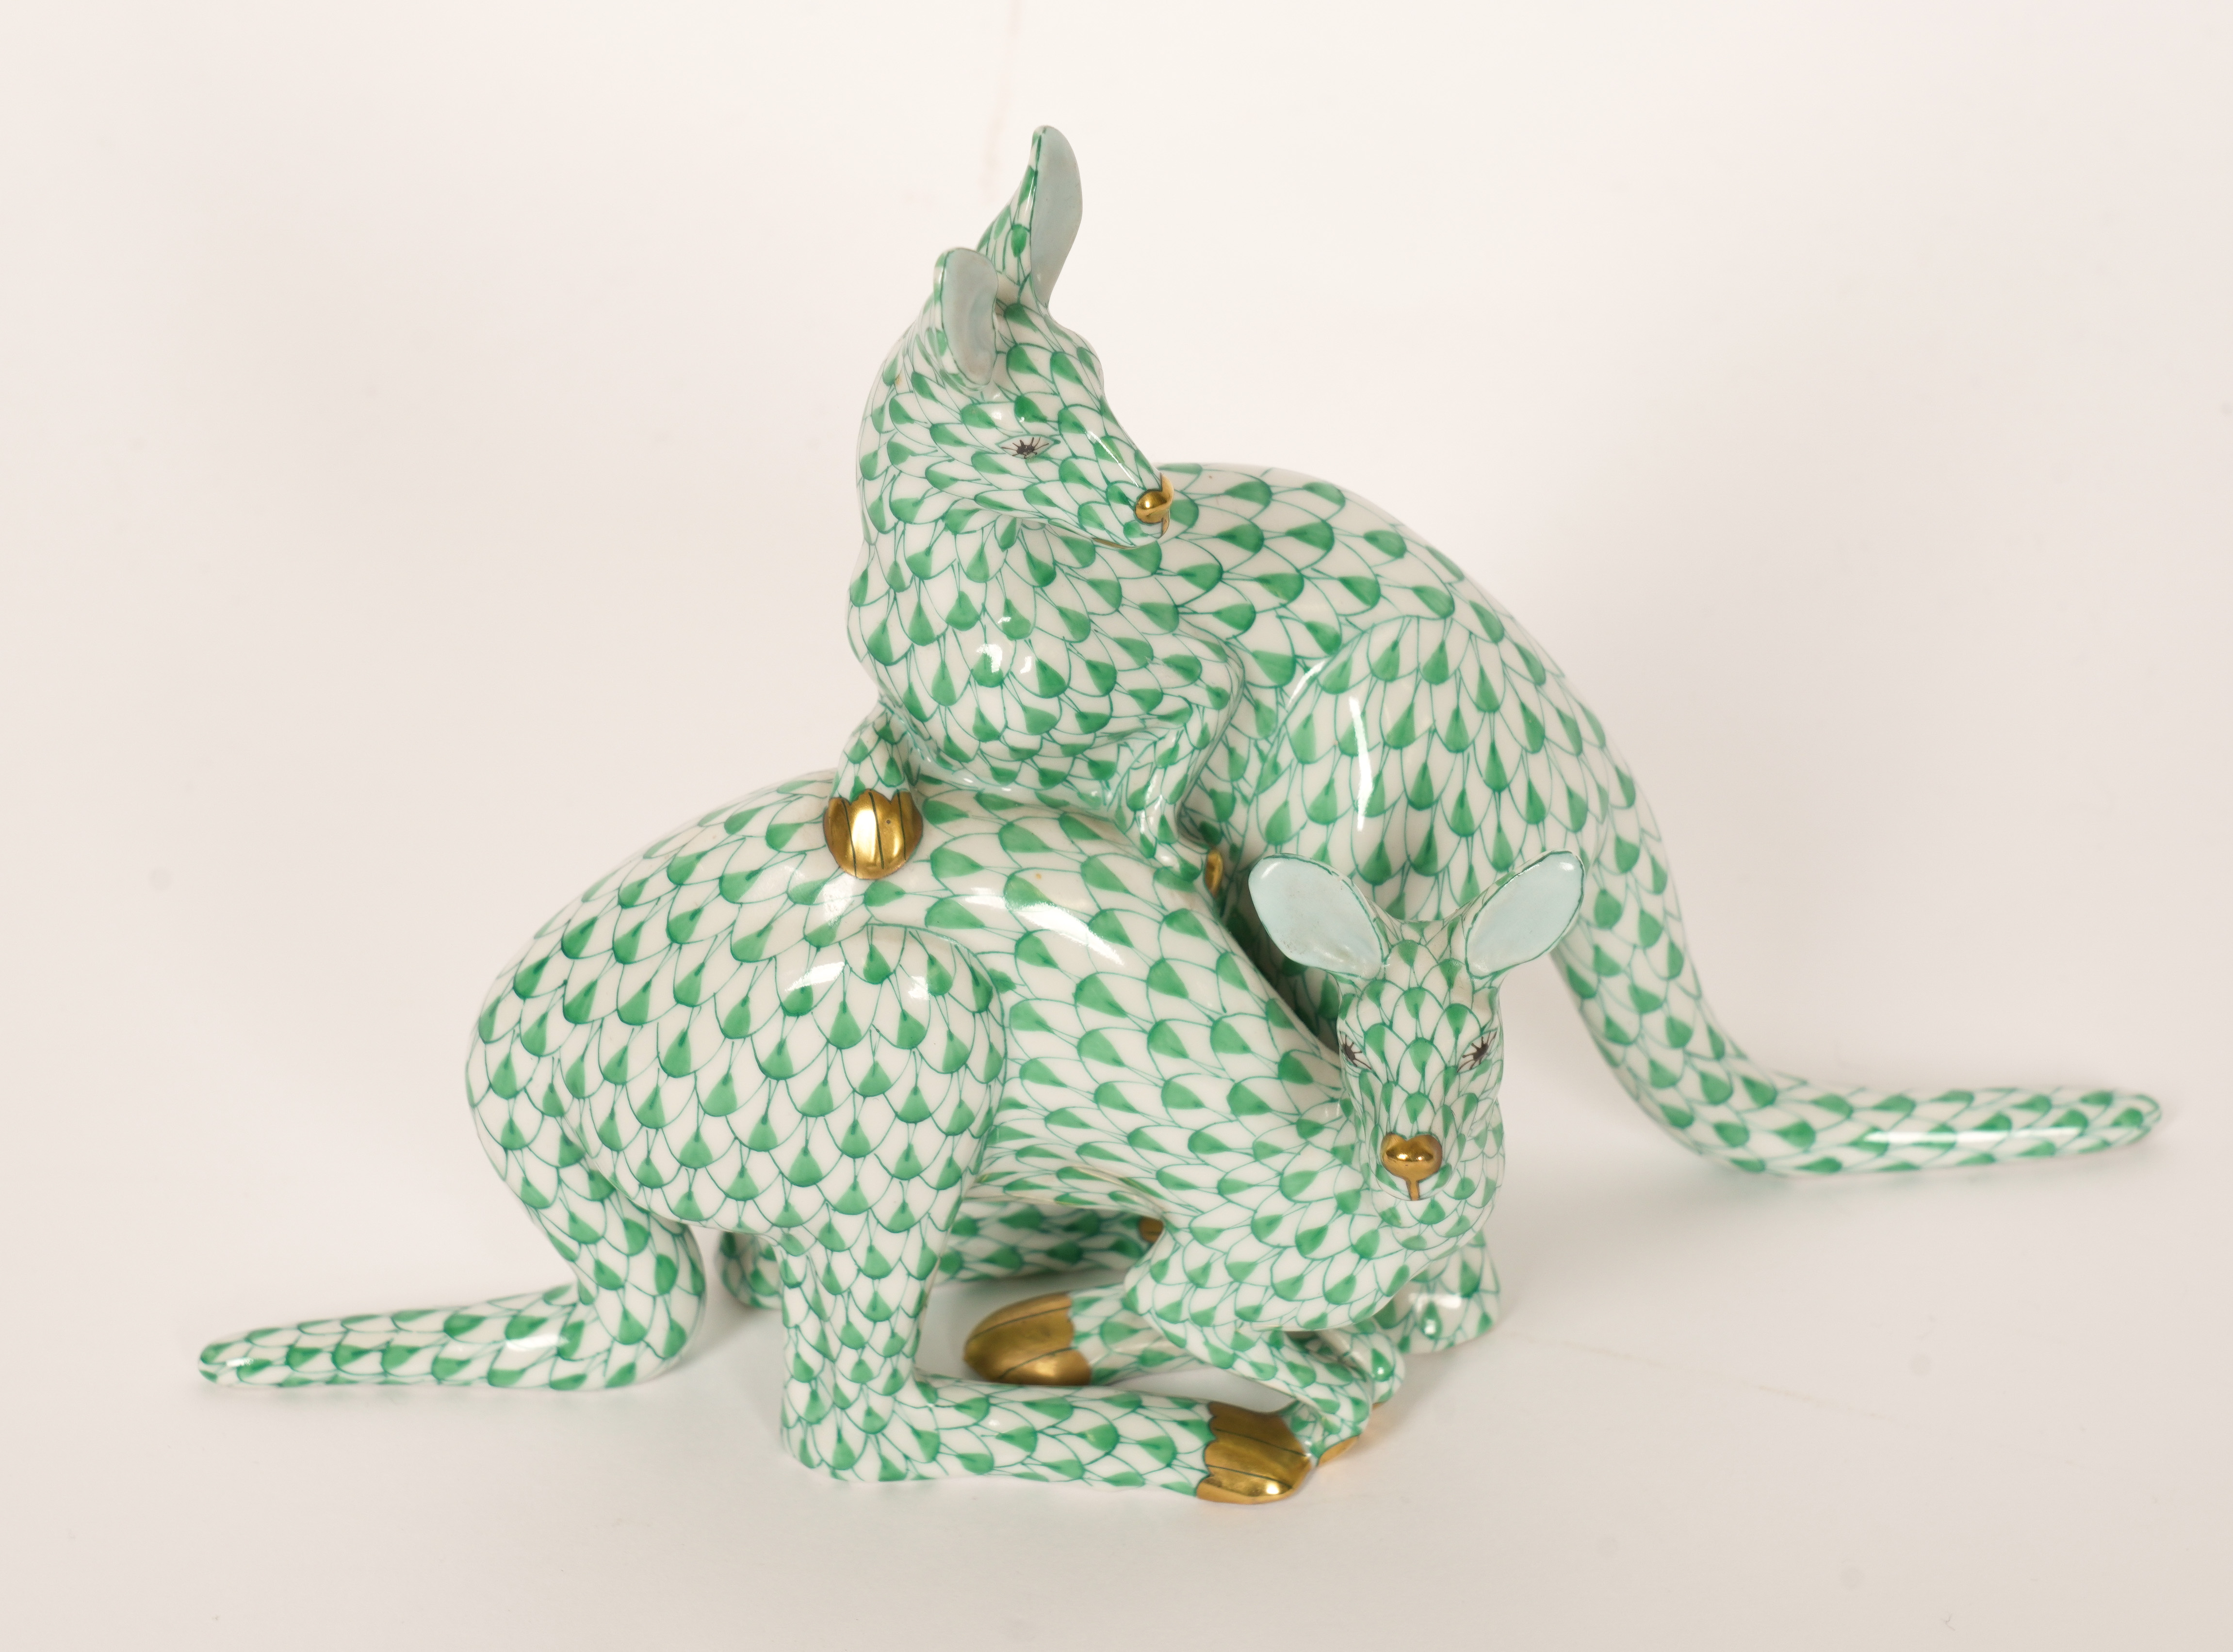 A HEREND PORCELAIN GROUP OF TWO GREEN FISHNET KANGAROOS - Image 2 of 3